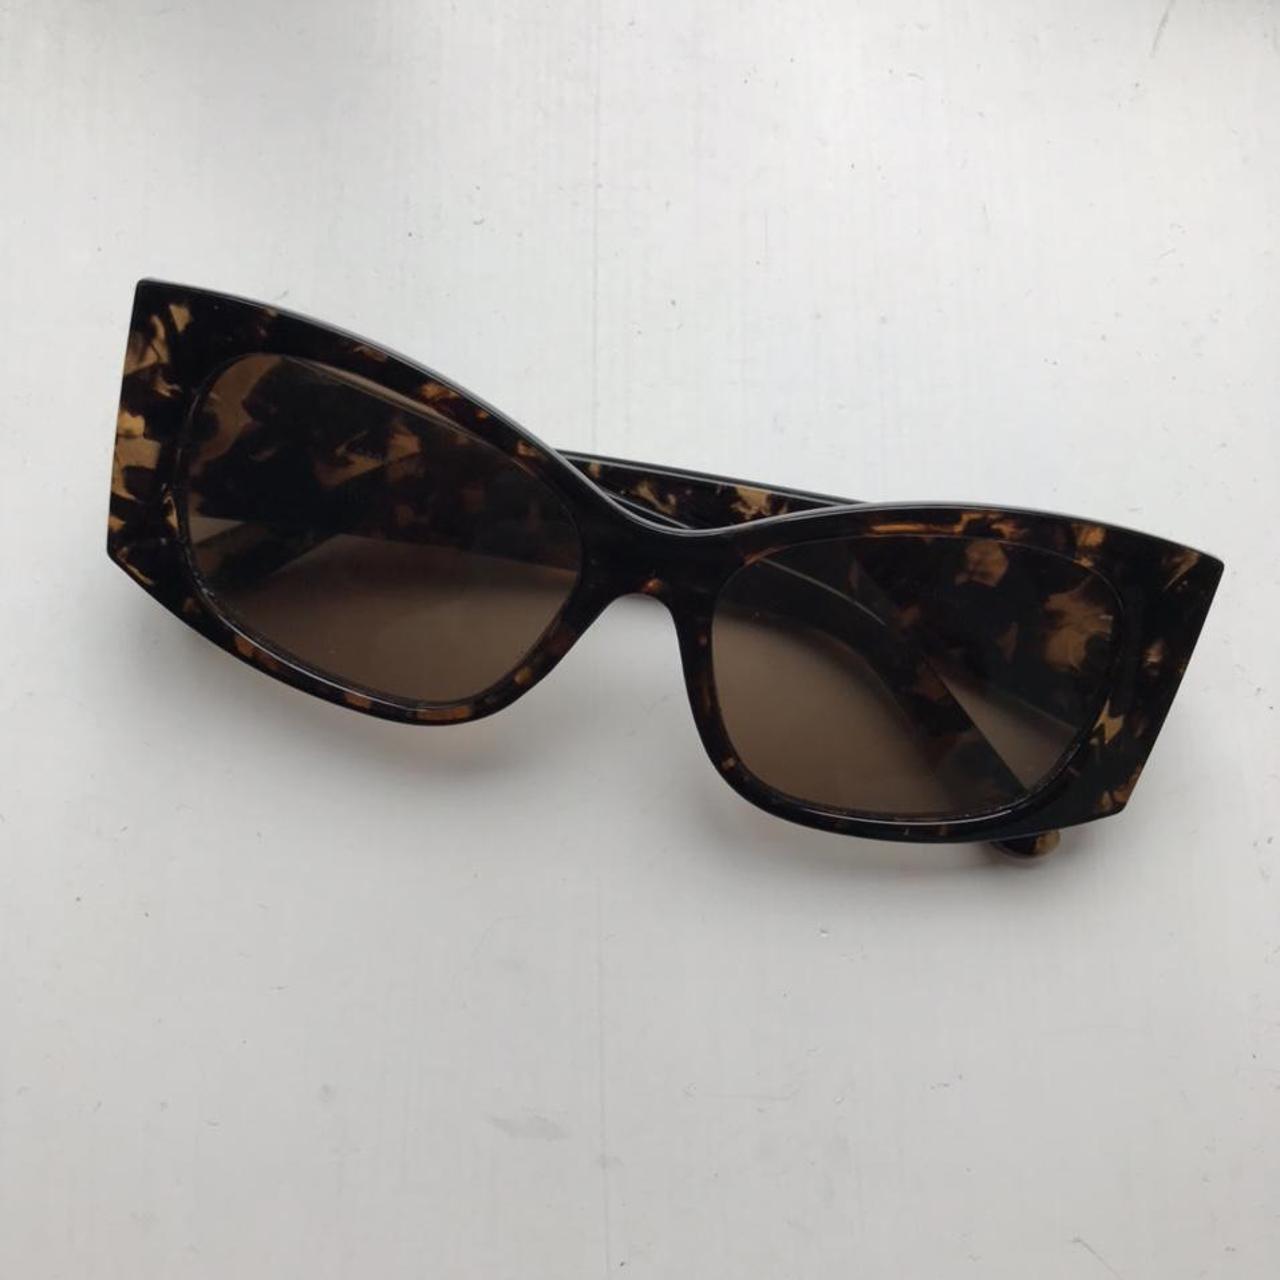 Product Image 2 - Asos Tortoise Shell Sunglasses
Wide frame
Some